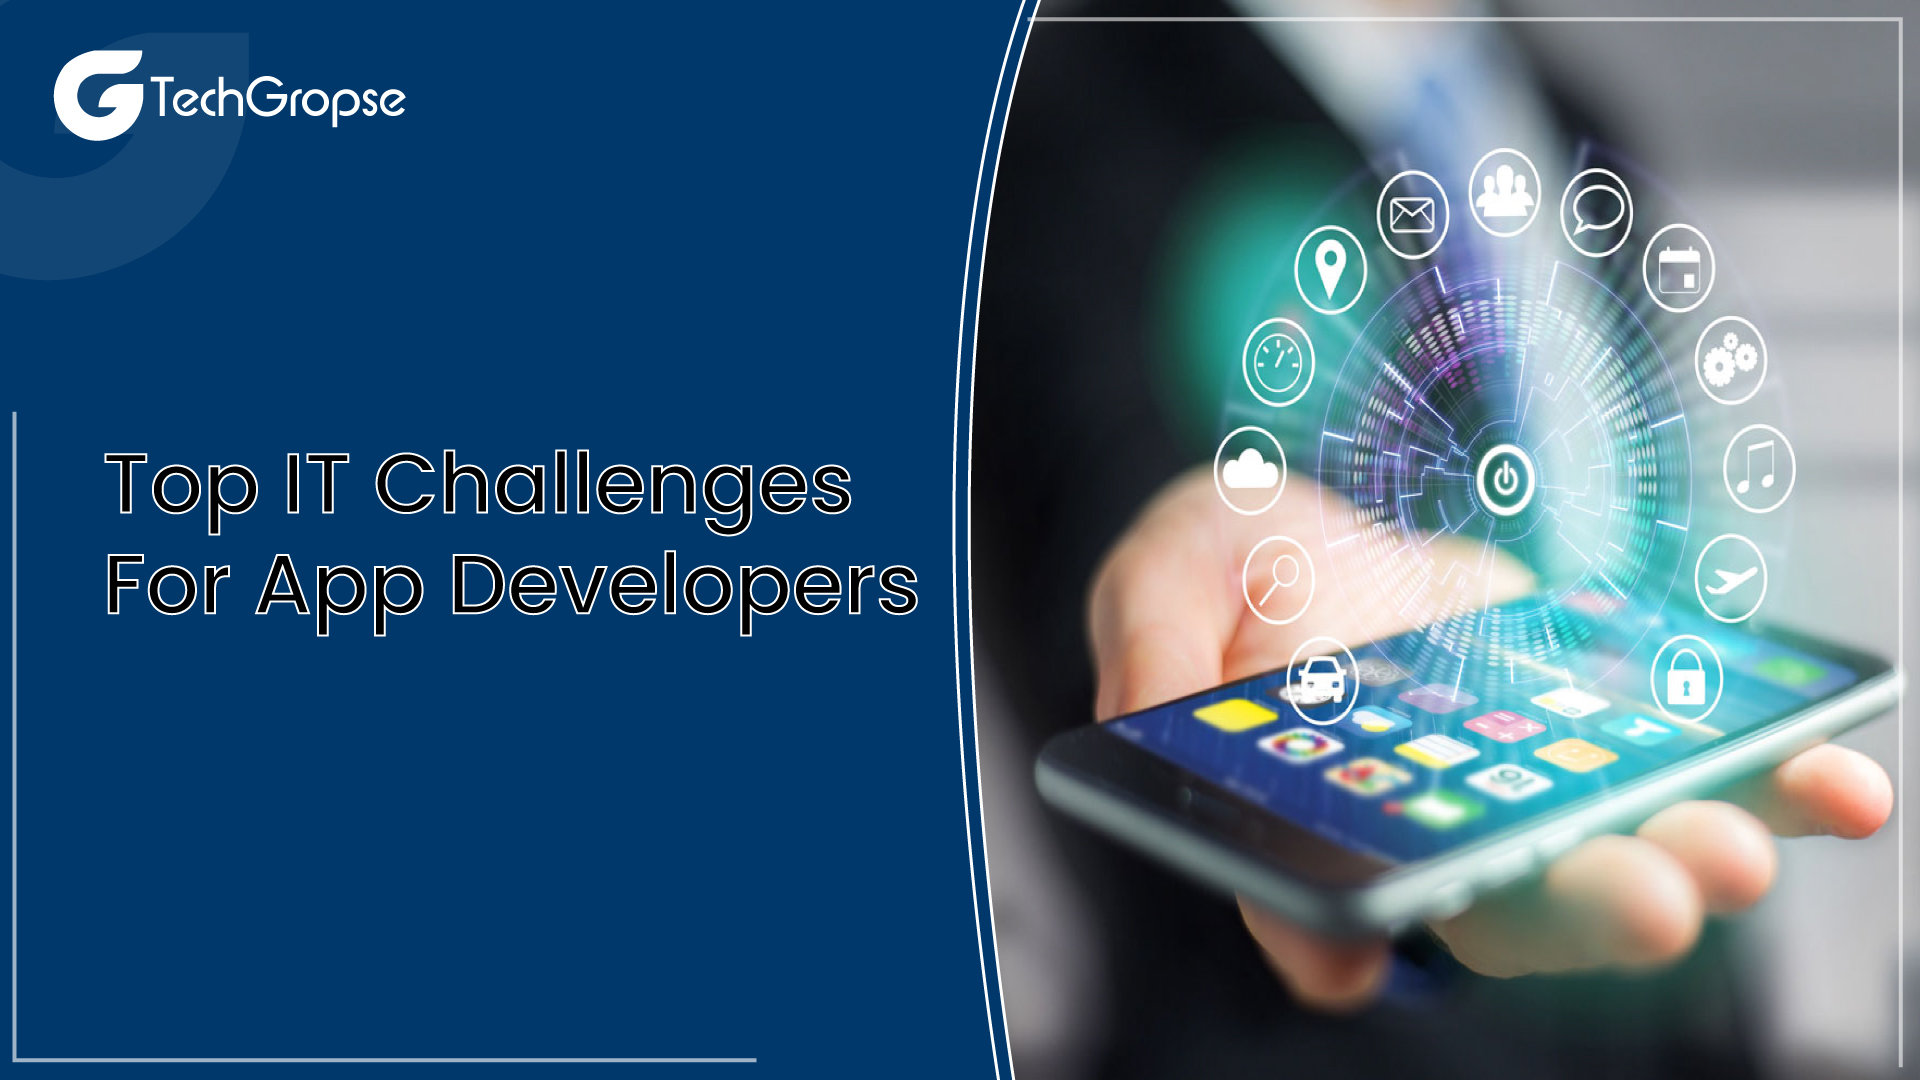 IT challenges and trends for app developers